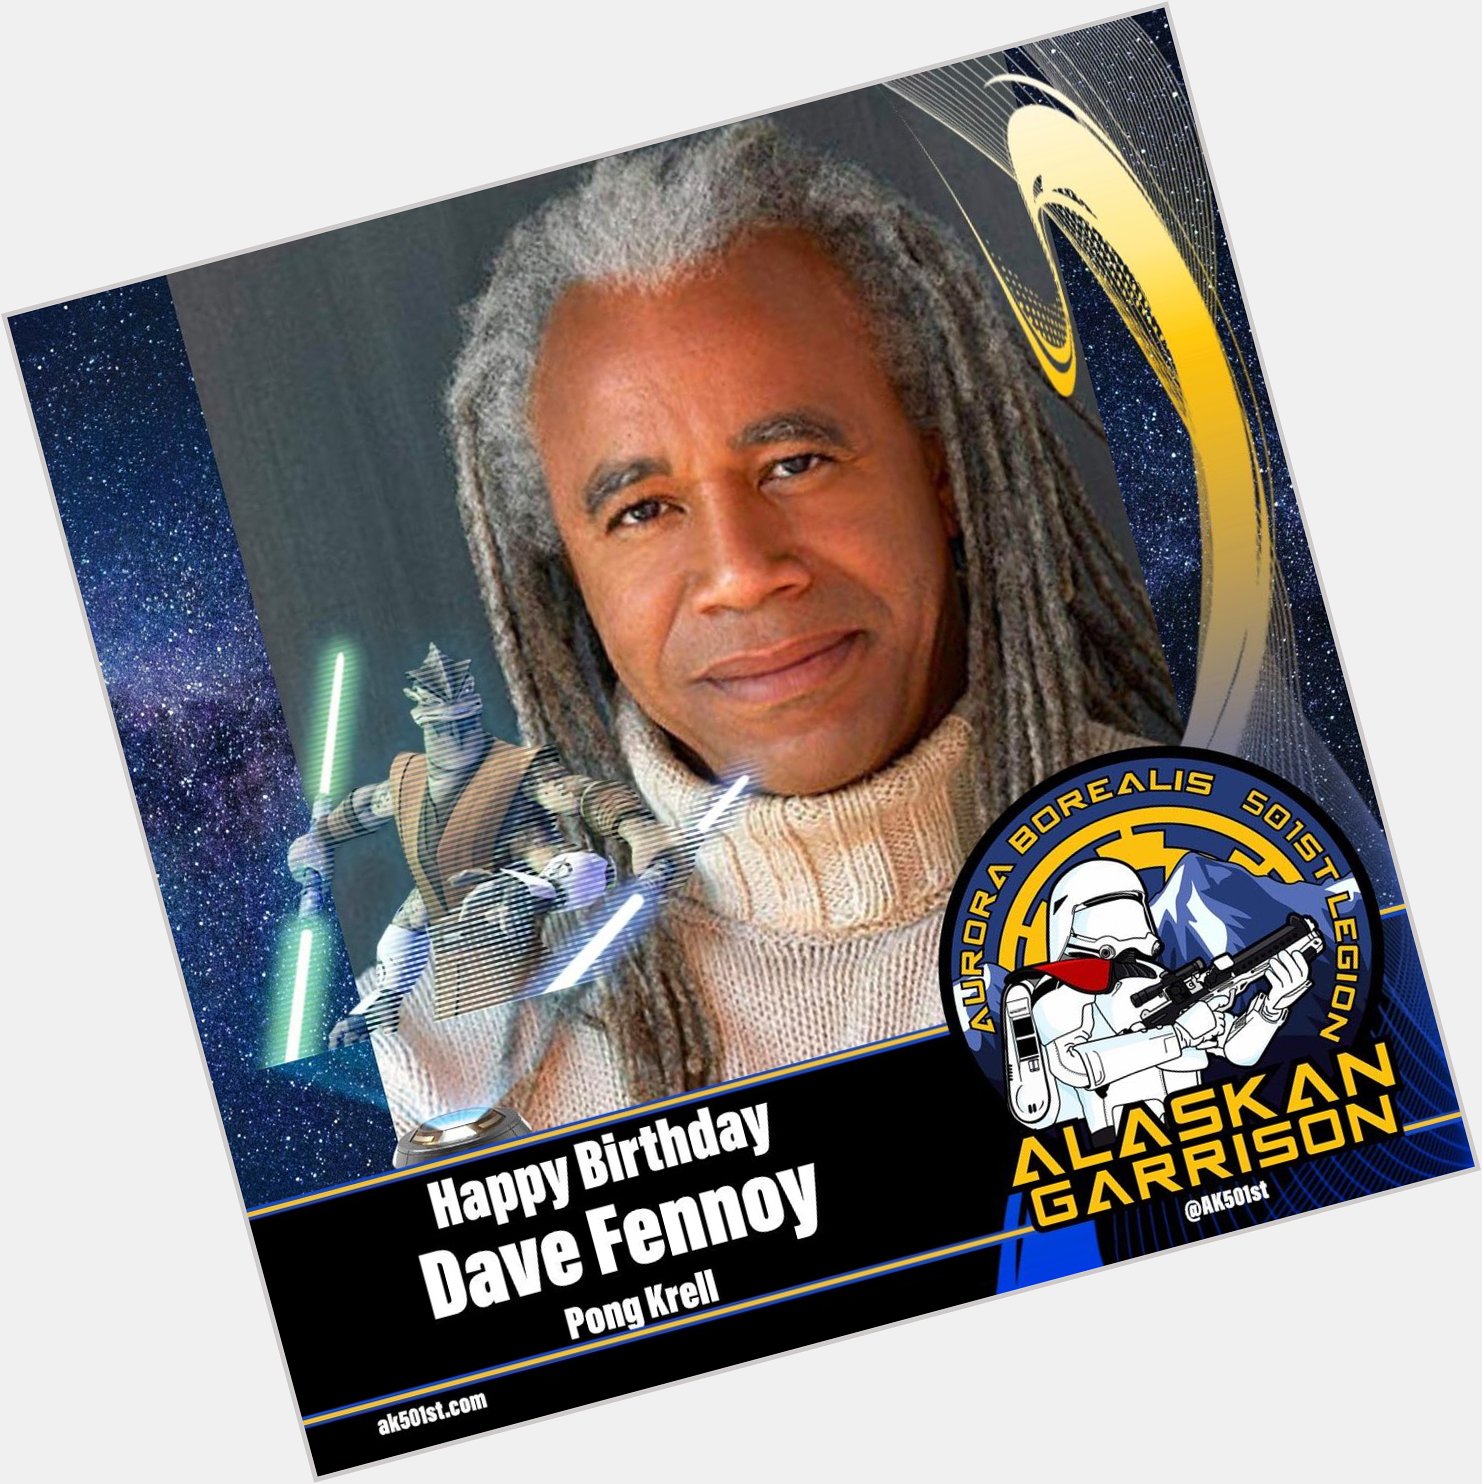 The Alaskan Garrison would like to wish Dave Fennoy a very happy birthday!   